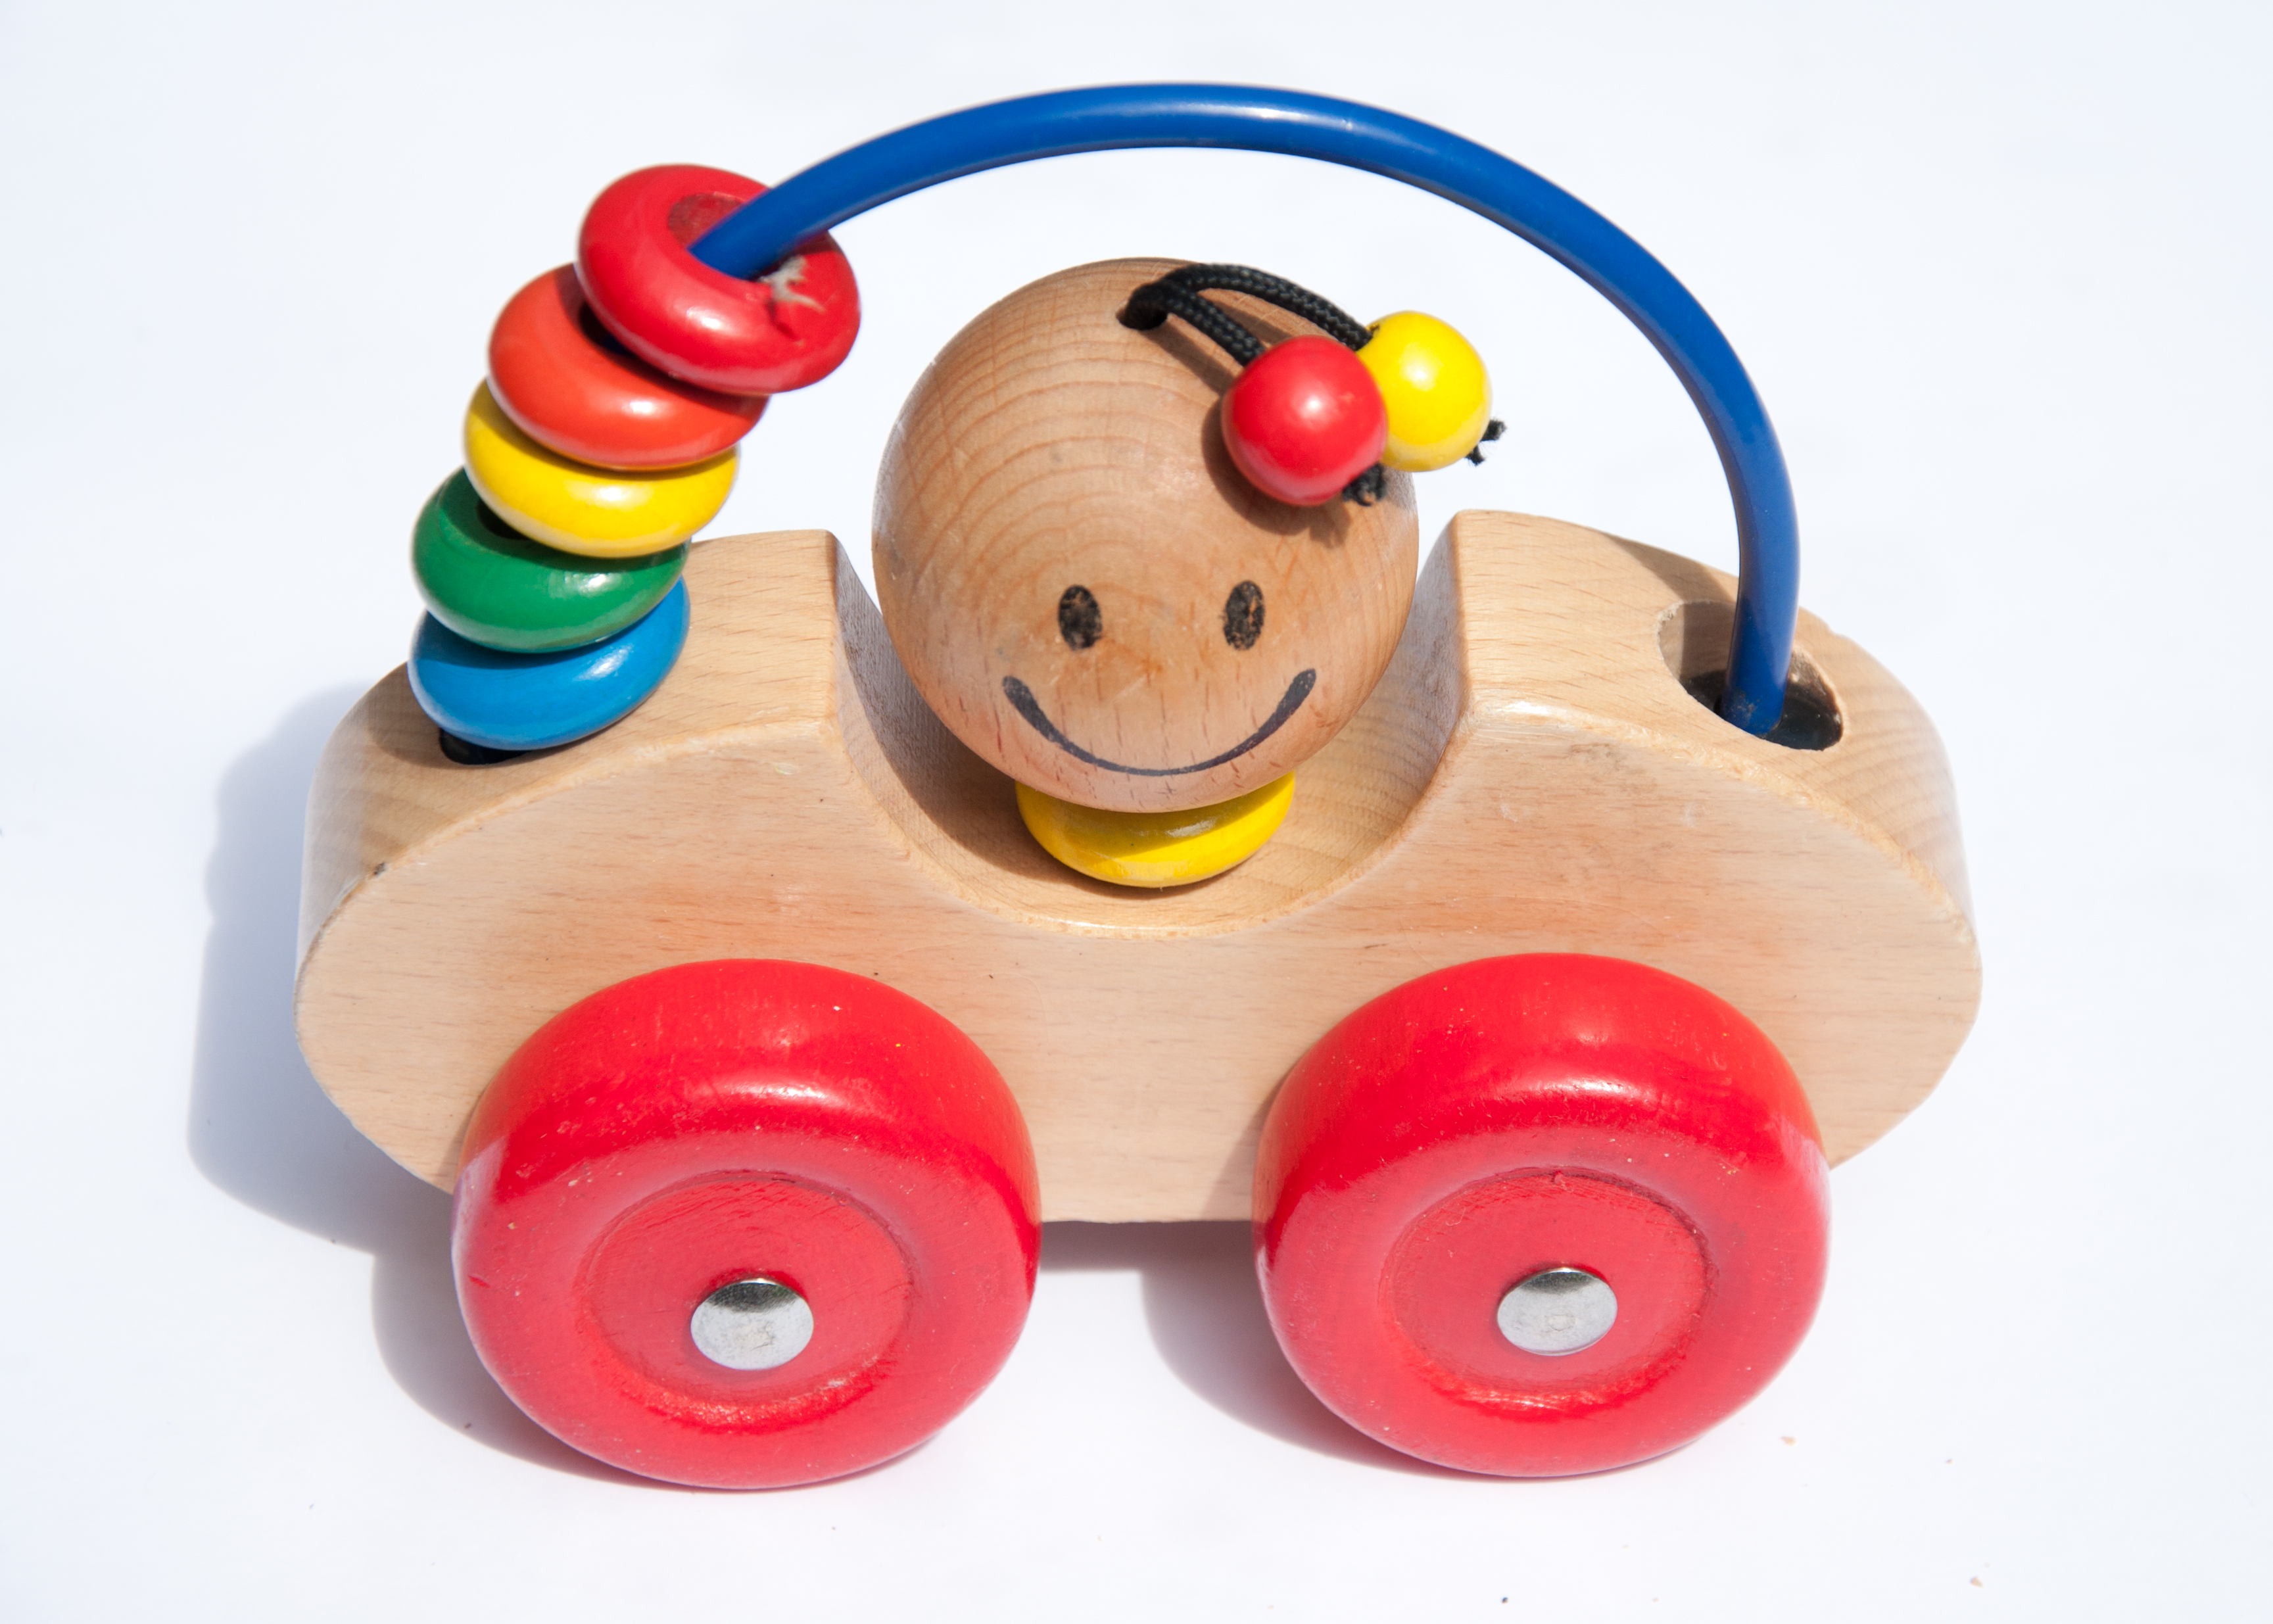 Childrens wooden toy car photo